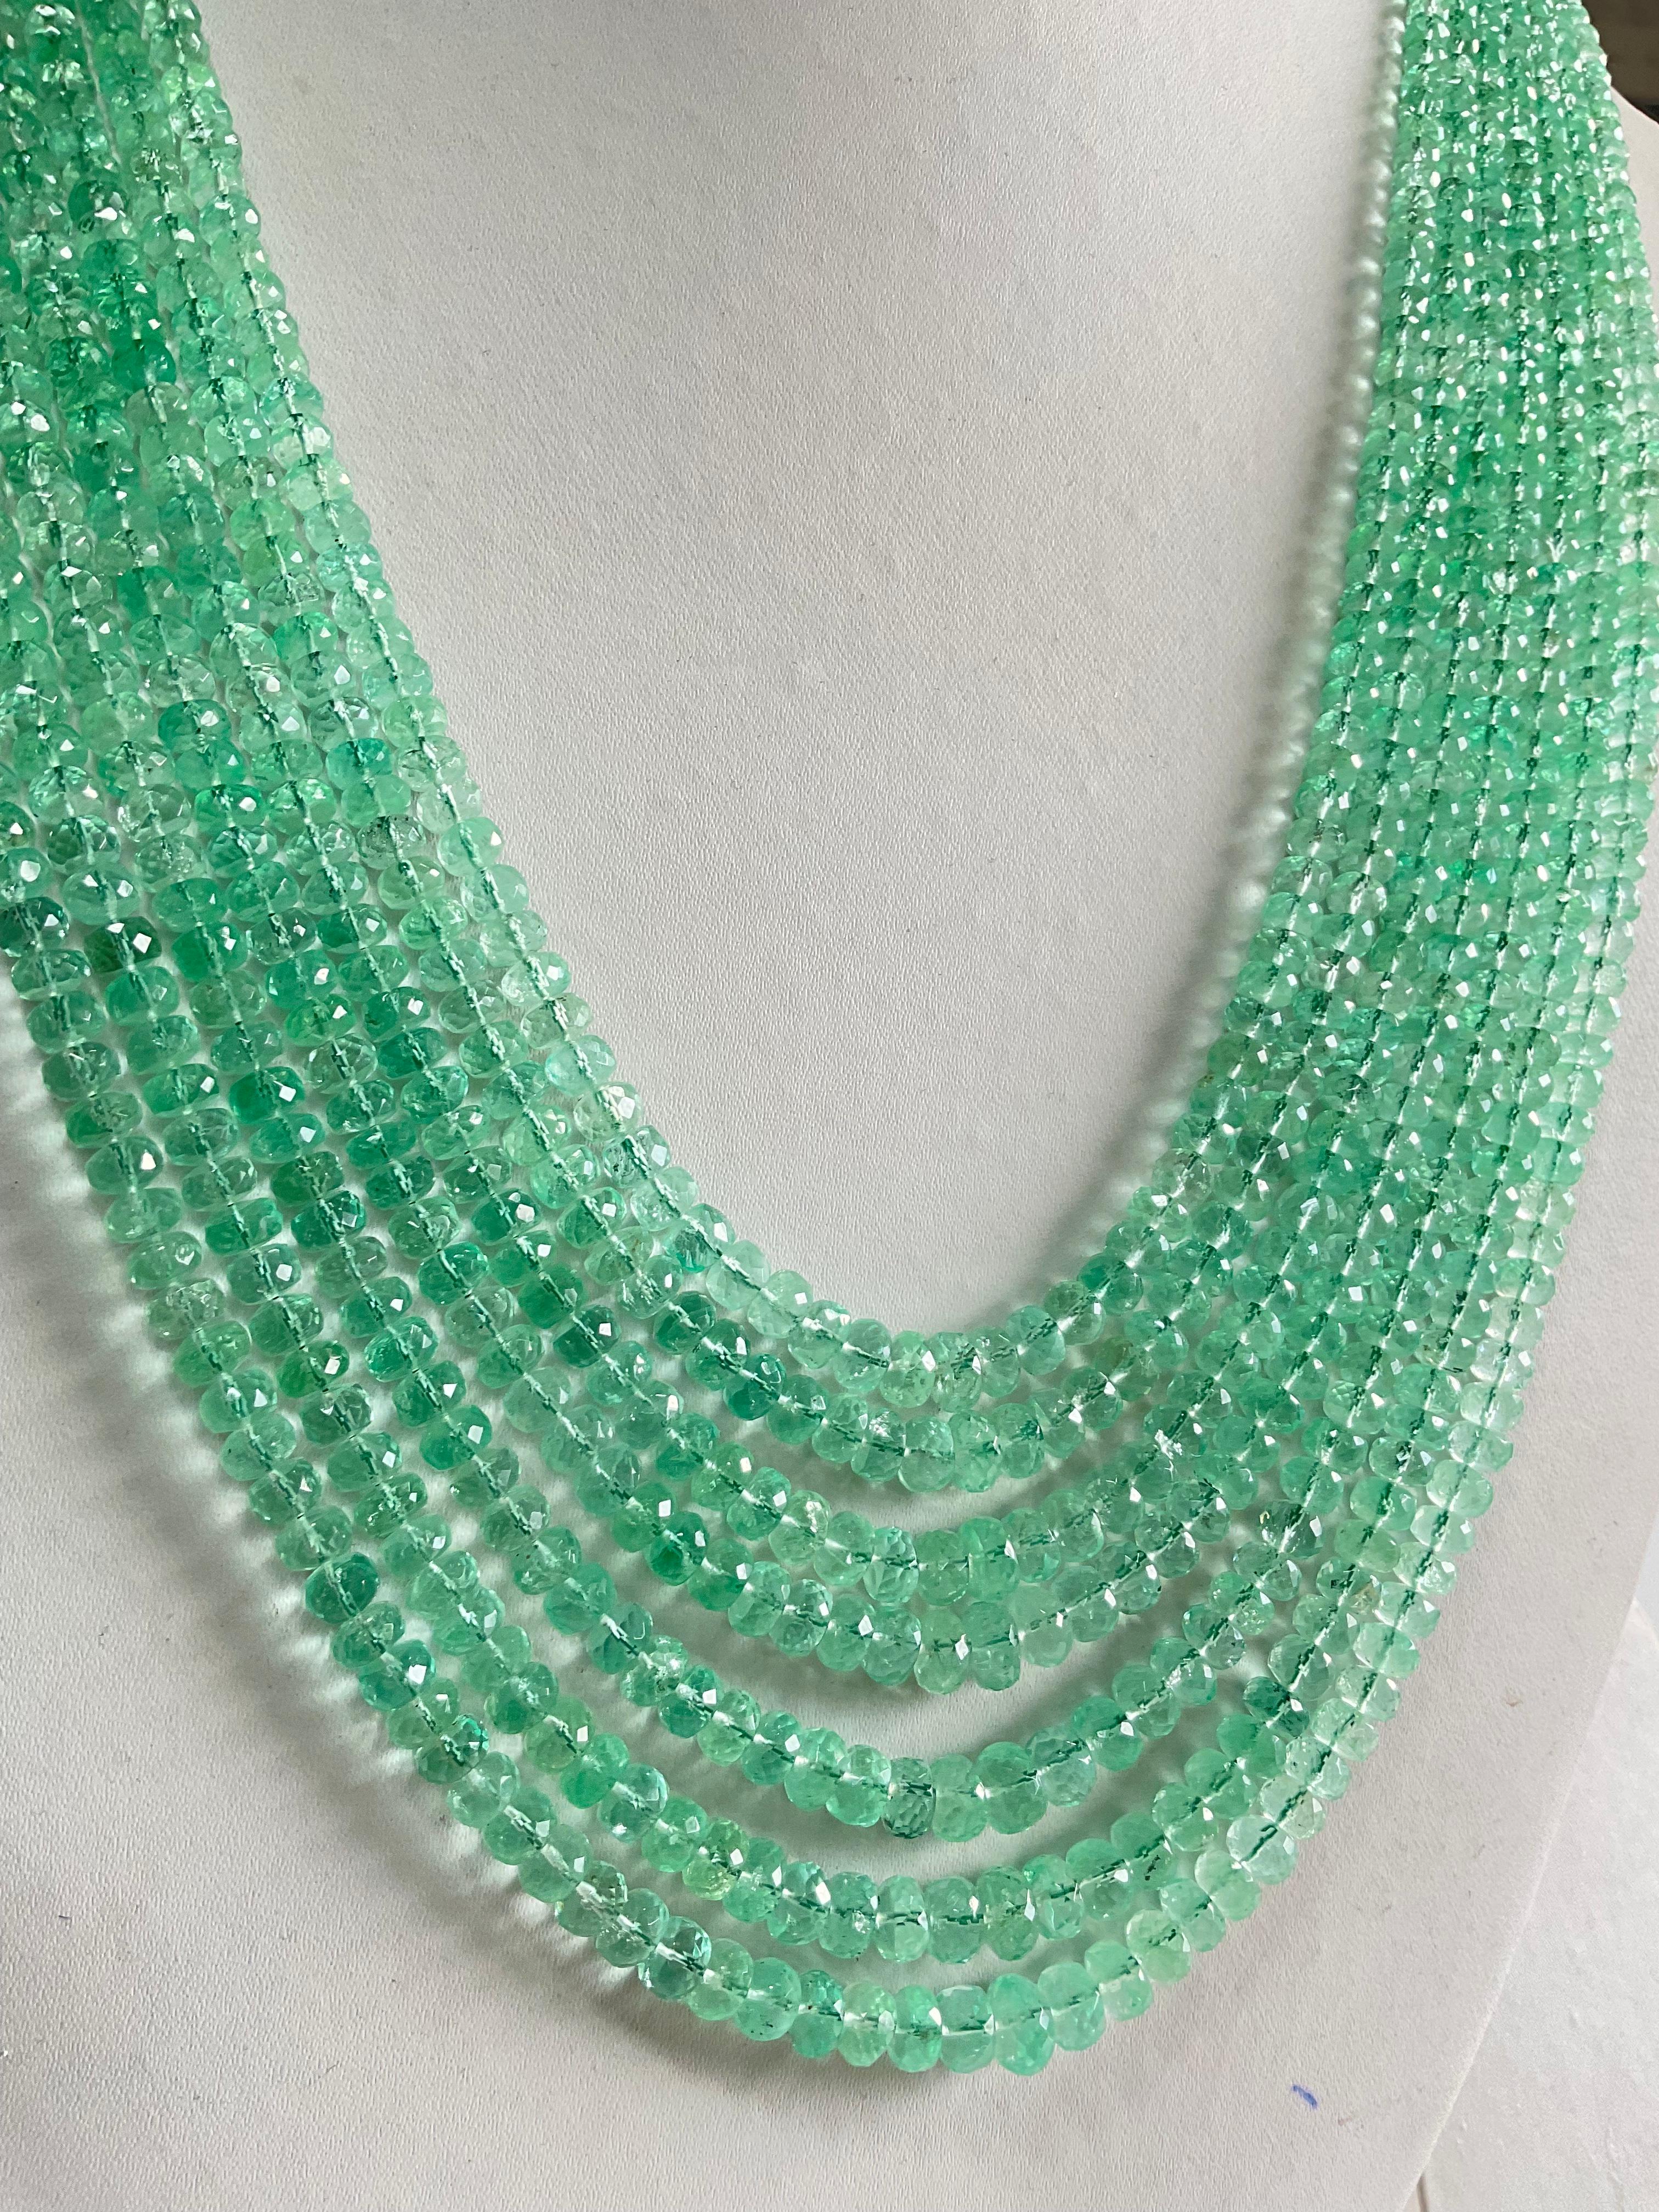 Colombian Emerald Beaded Jewelry Necklace Rondelle Beads Gem Quality 2